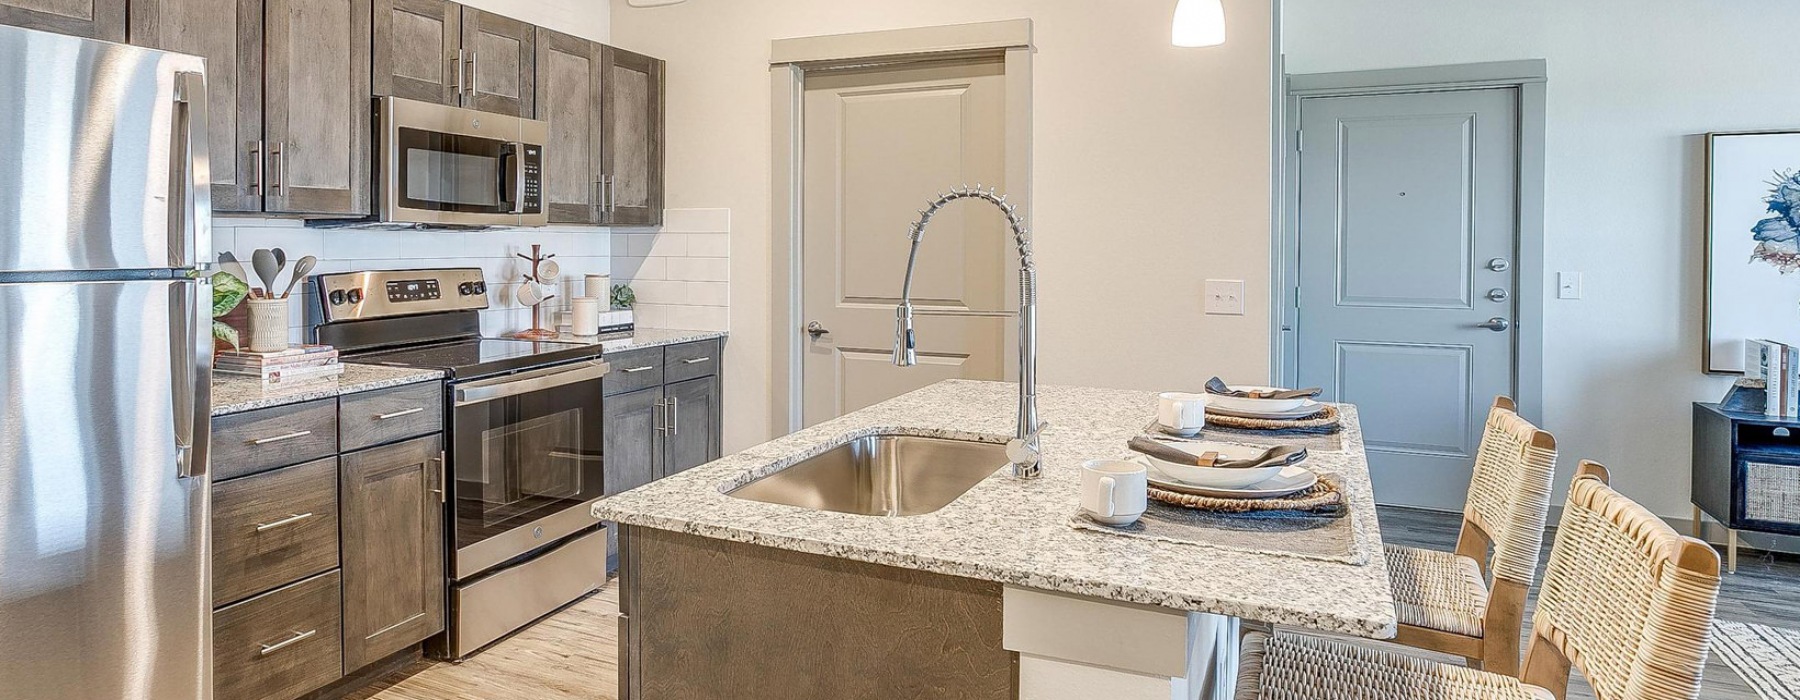 Well-lit kitchen with ample counter space in units at Chisholm Trace Apartments